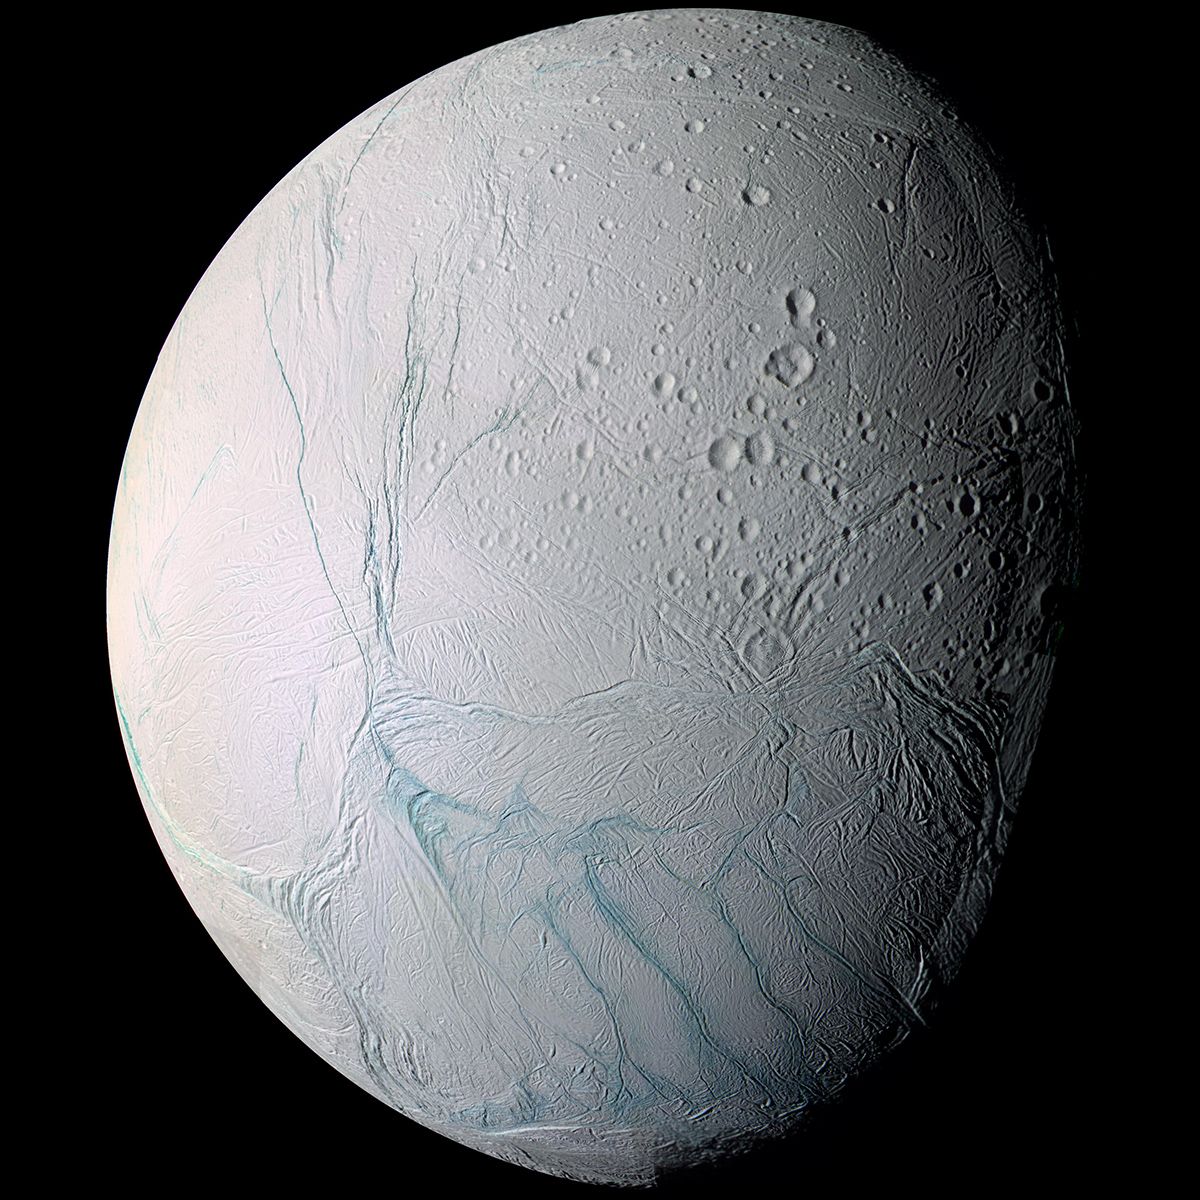 As it swooped past the south pole of Saturn's moon Enceladus on July 14, 2005, Cassini acquired high resolution views of this puzzling ice world.